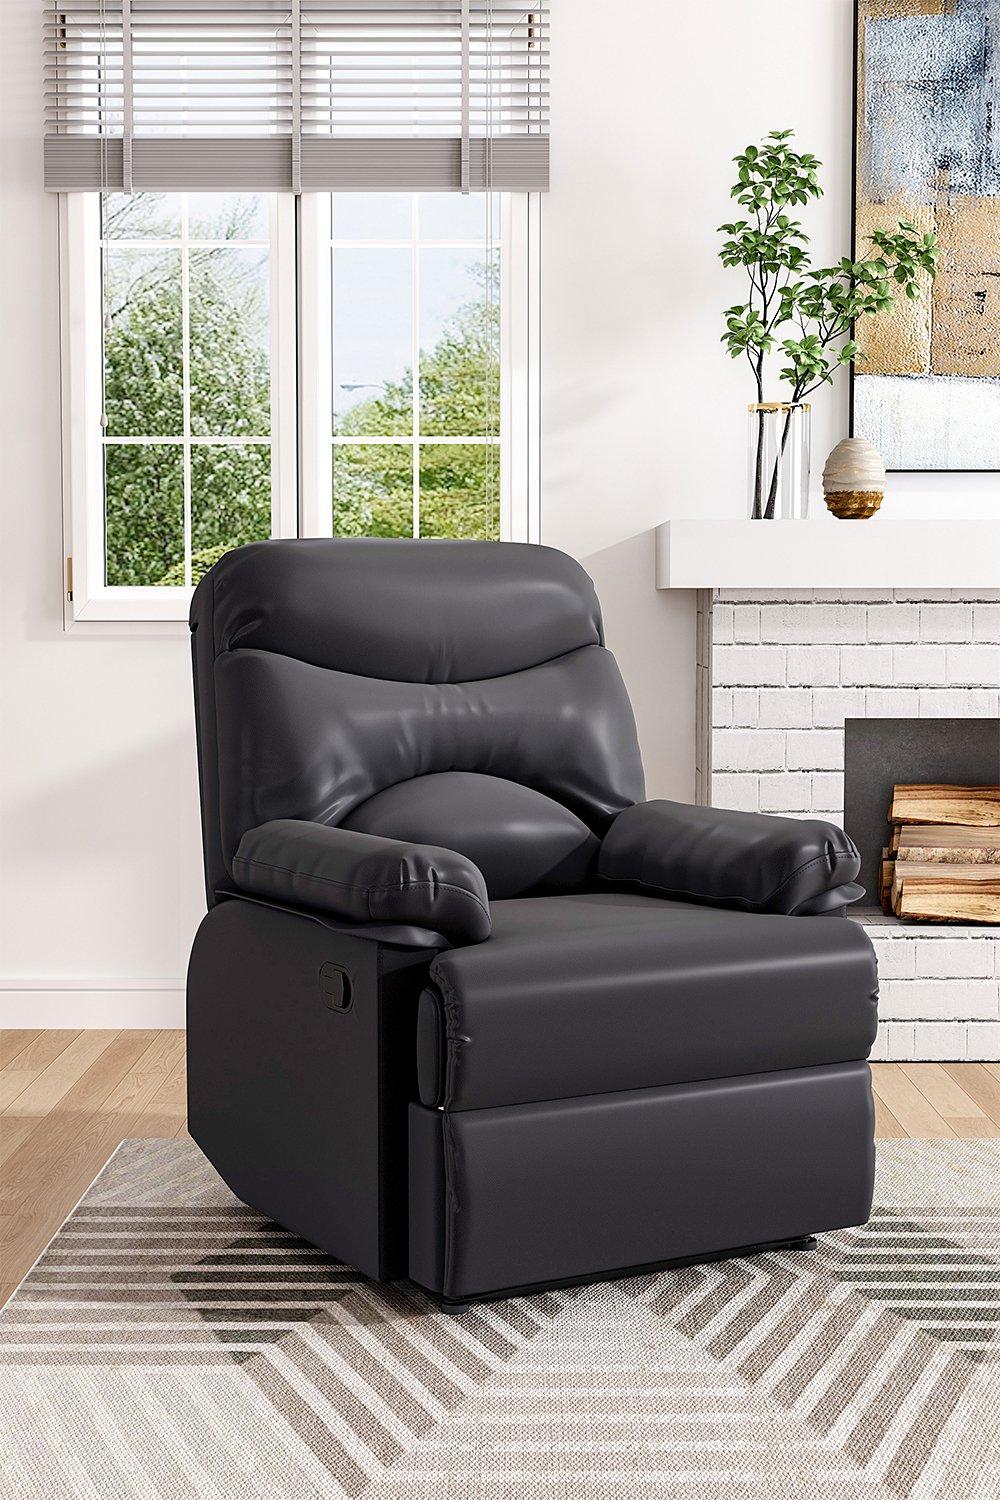 Black Manual Faux Leather Recliner Armchair